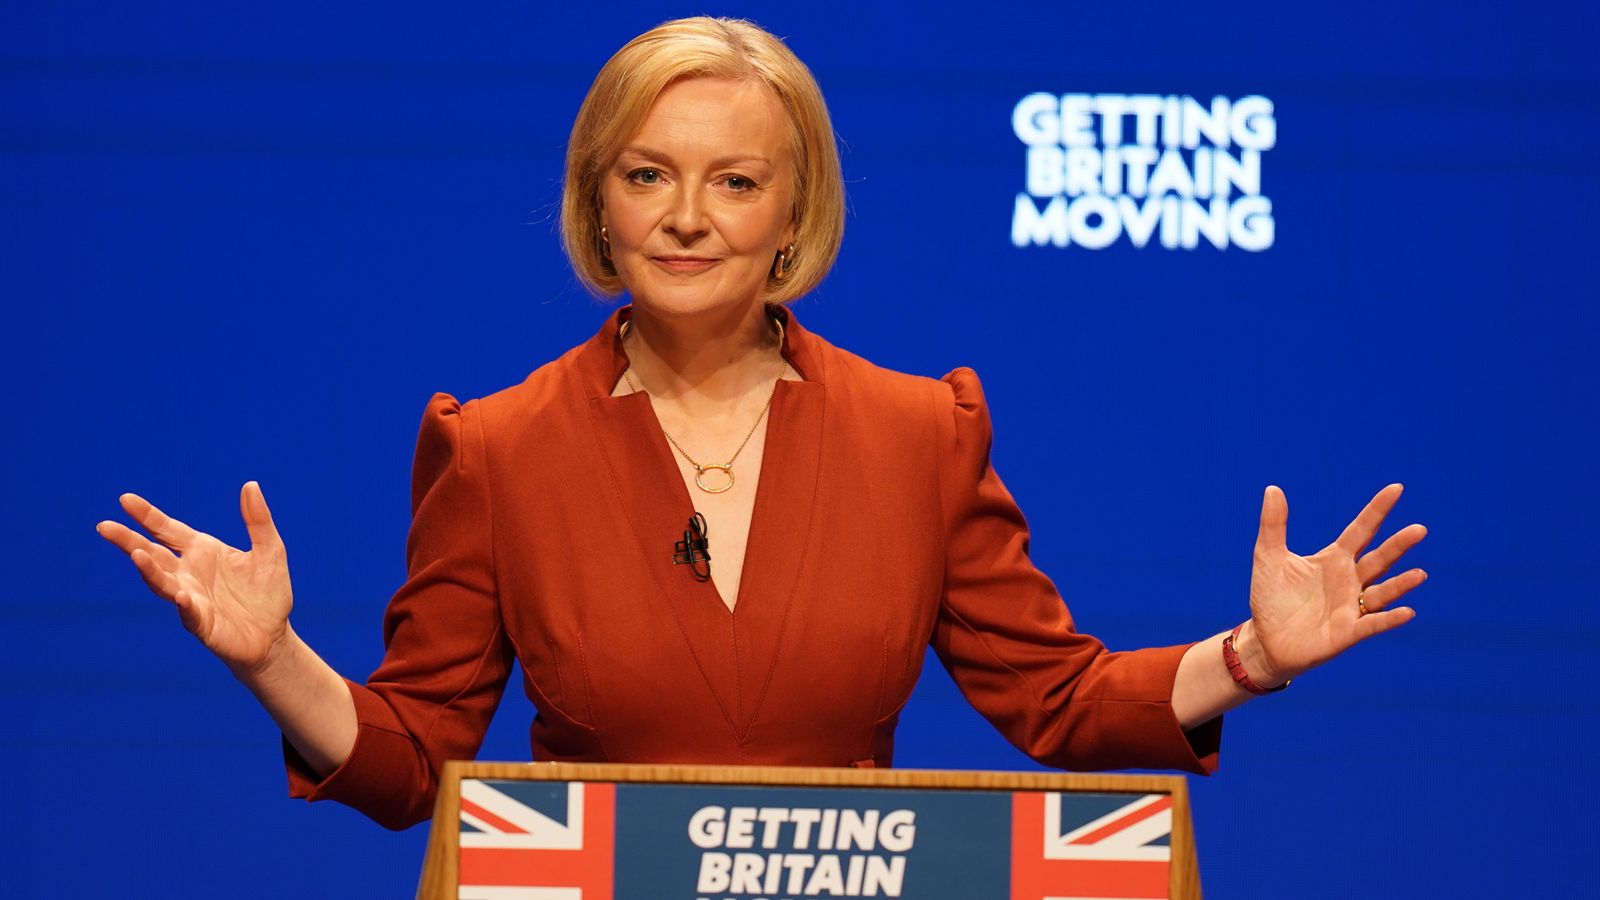 liz-truss-s-investment-zones-under-review-as-michael-gove-draws-red-line-on-environment